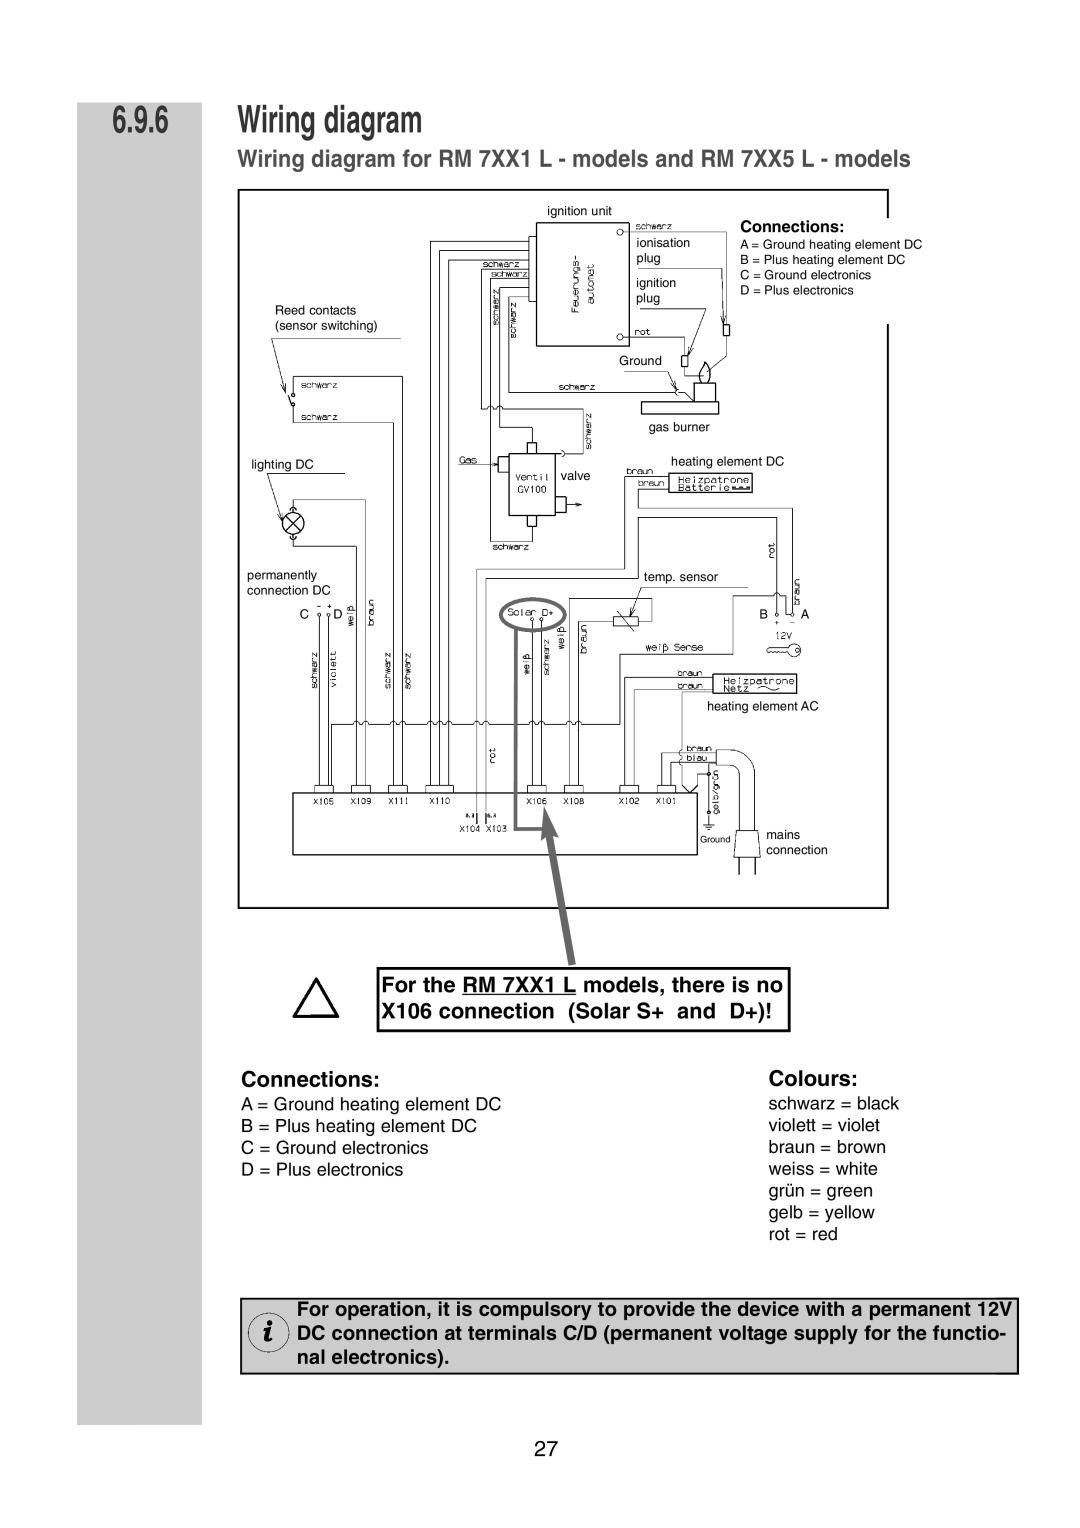 Dometic RM 7271 L, RM 7365 L 6.9.6Wiring diagram, For the RM 7XX1 Lmodels, there is no, X106 connection Solar S+ and D+ 